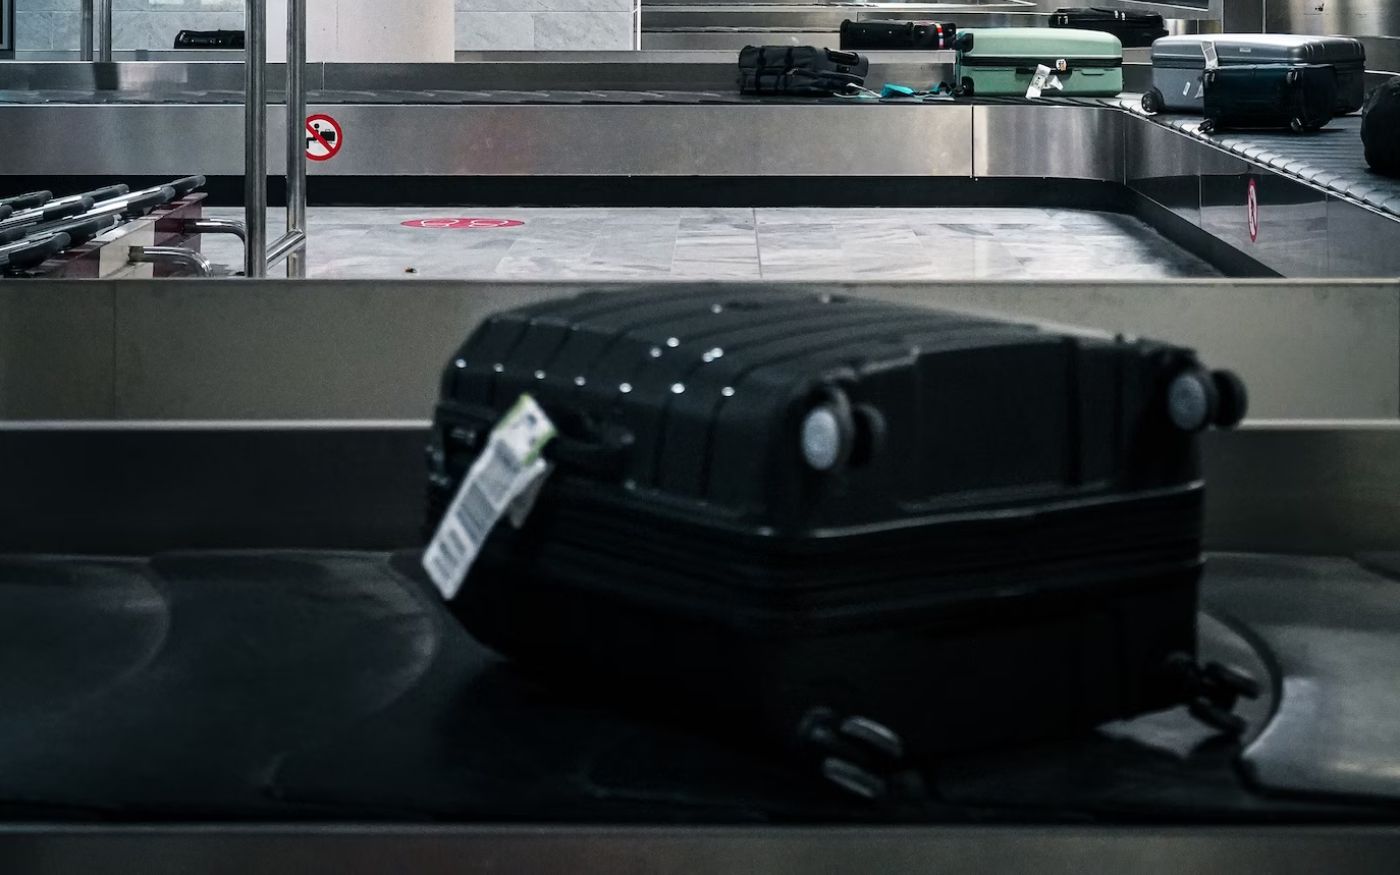 unclaimed luggage on conveyor belt at the airport